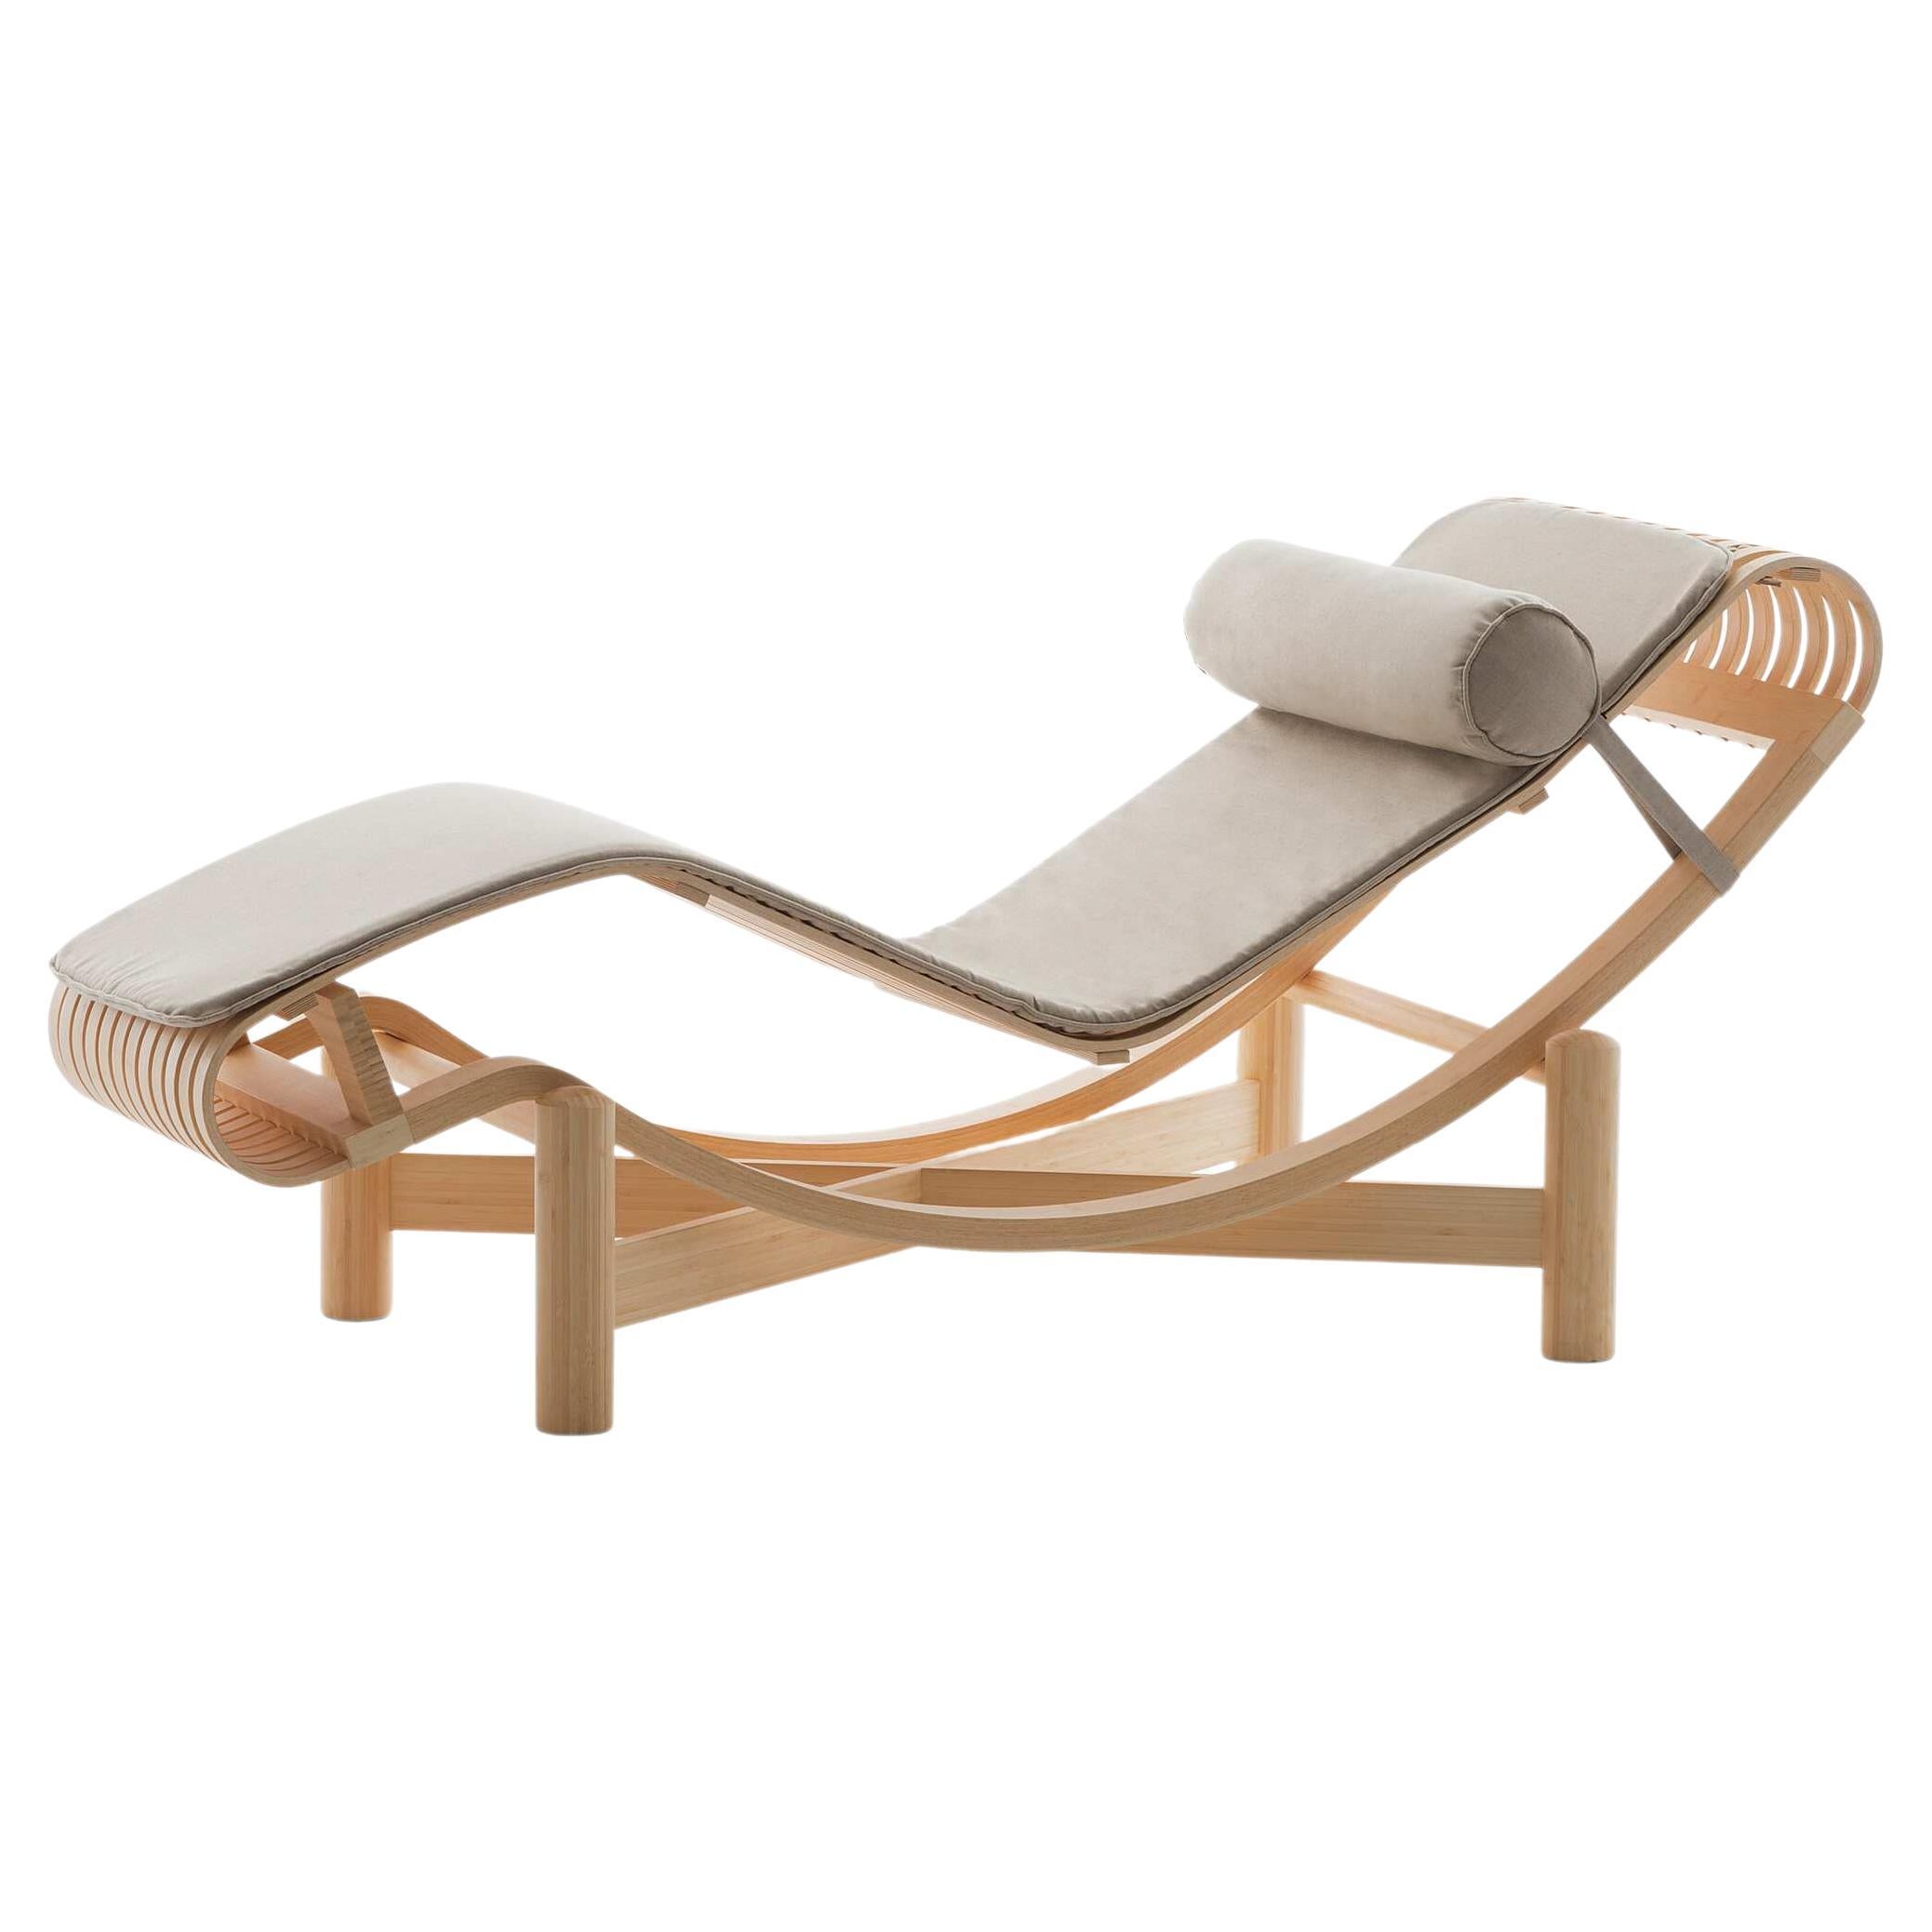 Charlotte Perriand Tokyo Chaise Longue by Cassina For Sale